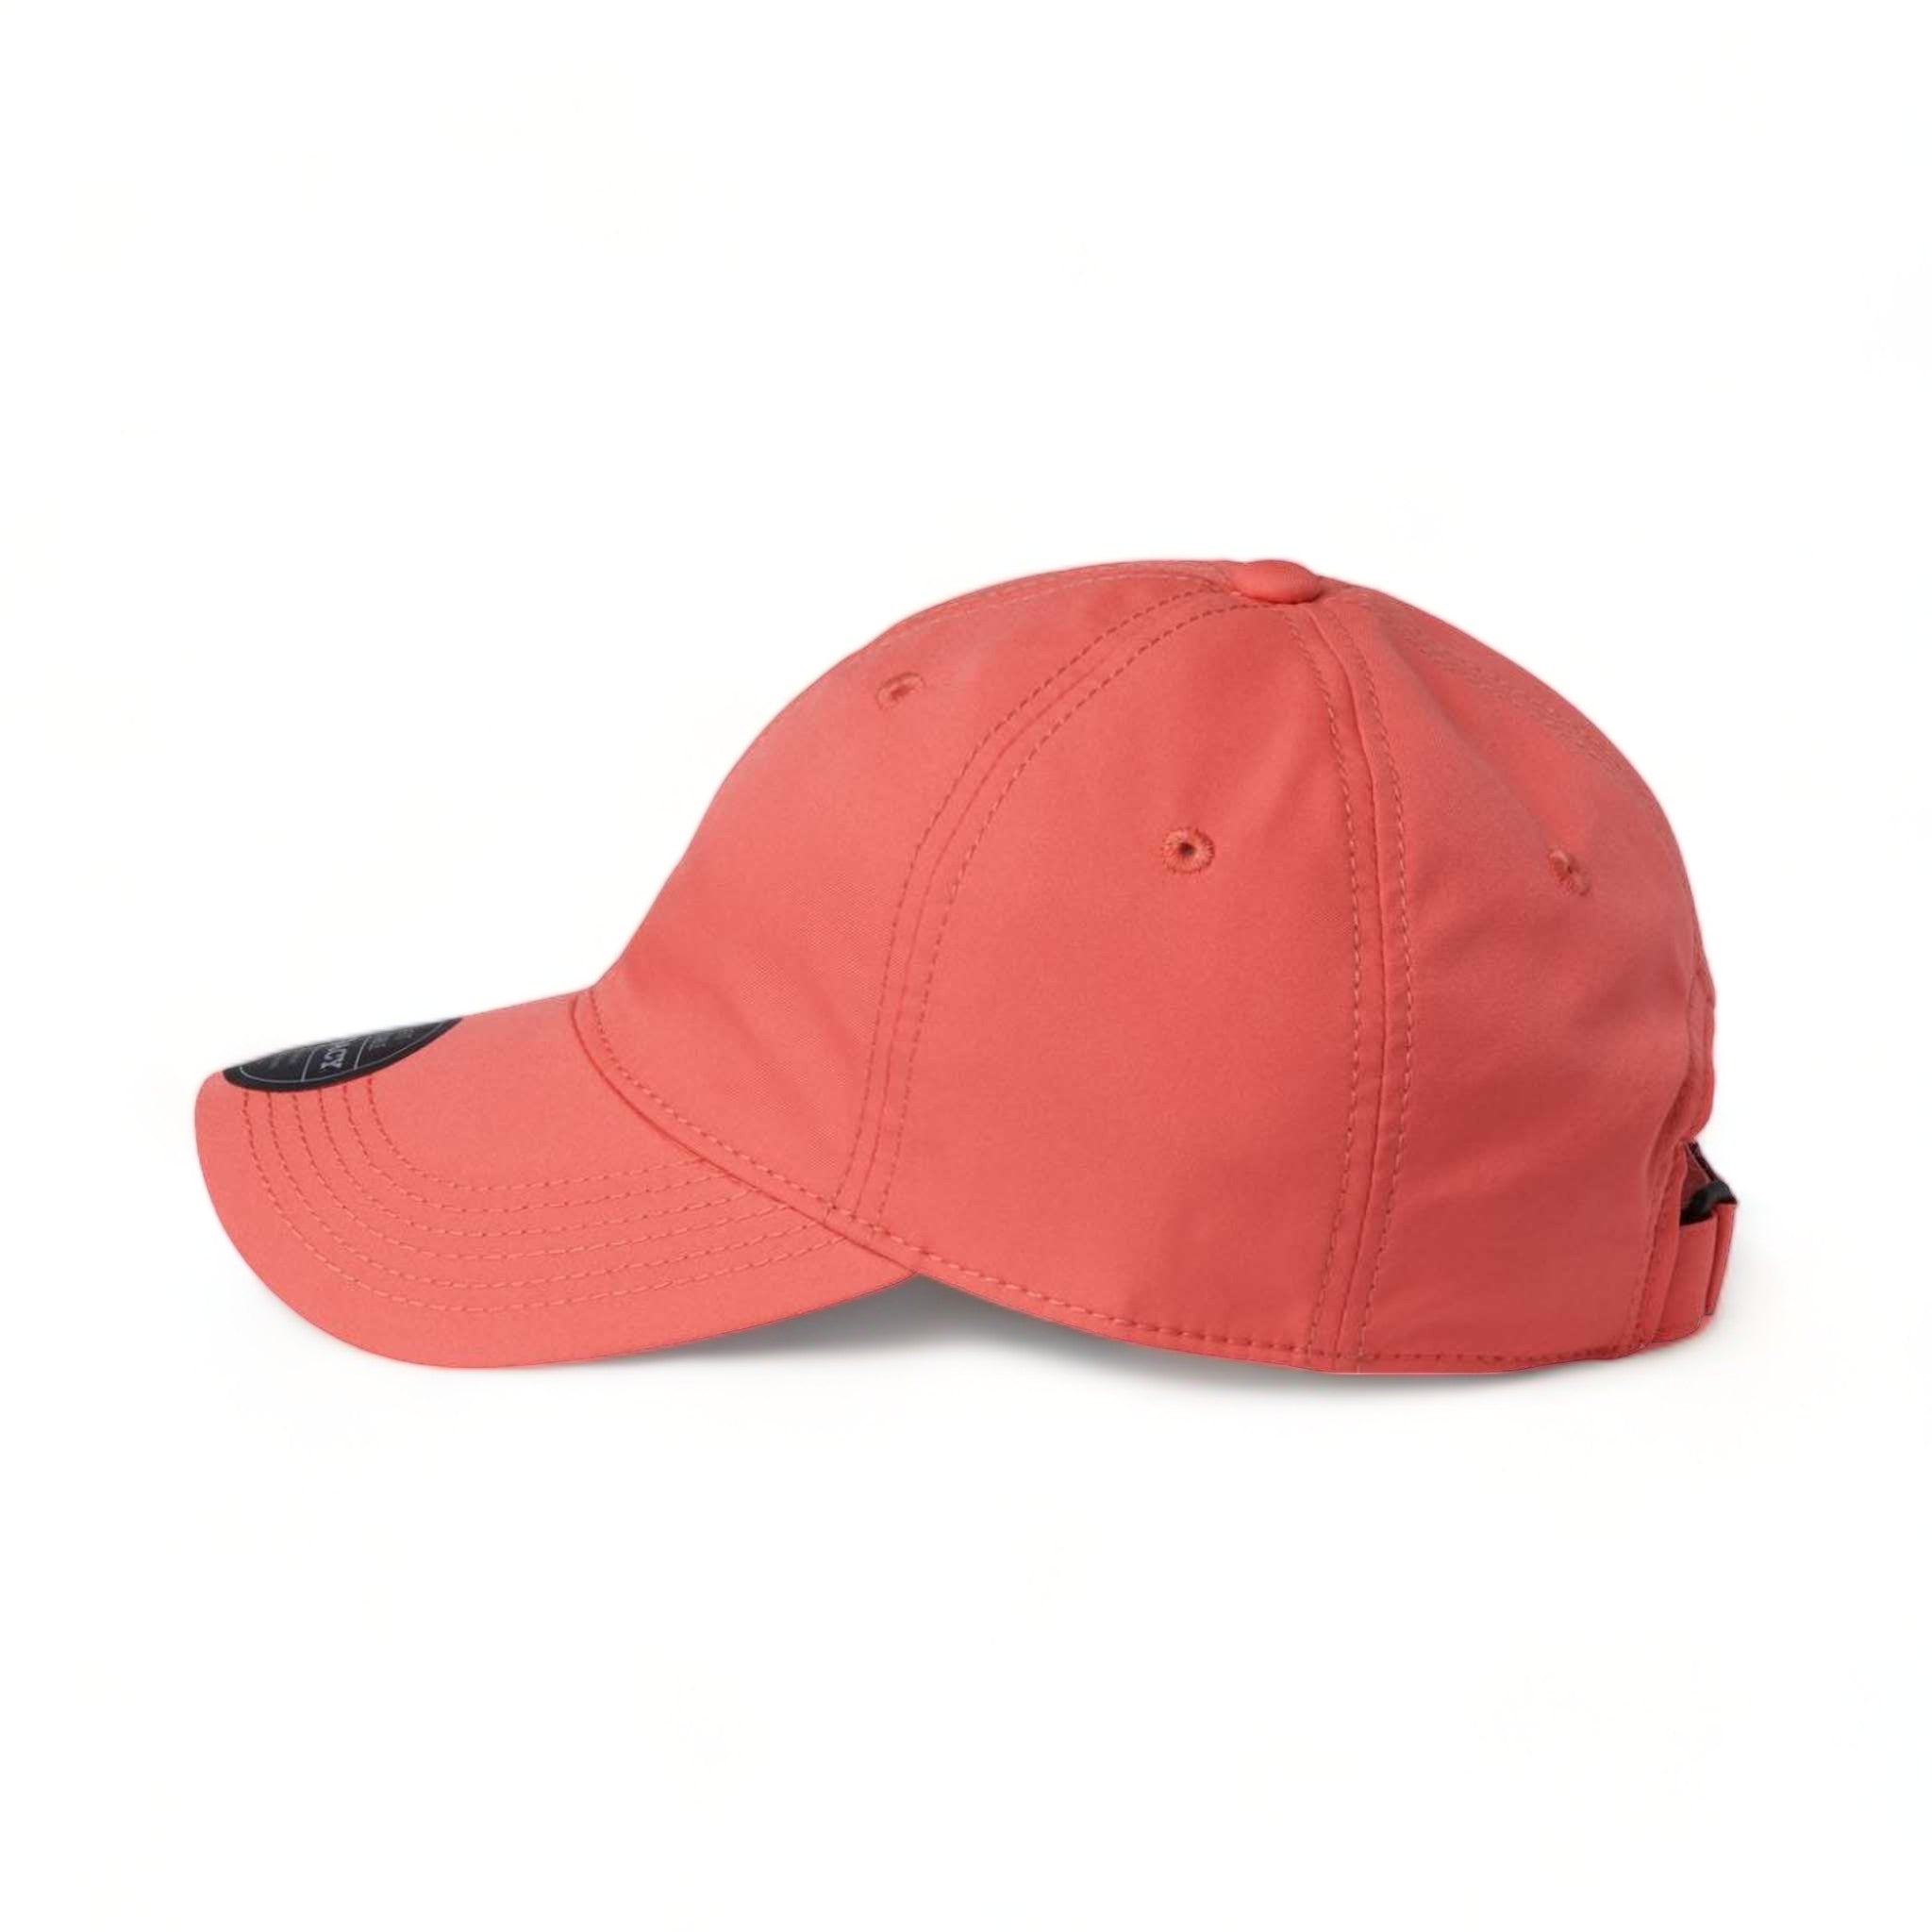 Side view of LEGACY CFA custom hat in coral